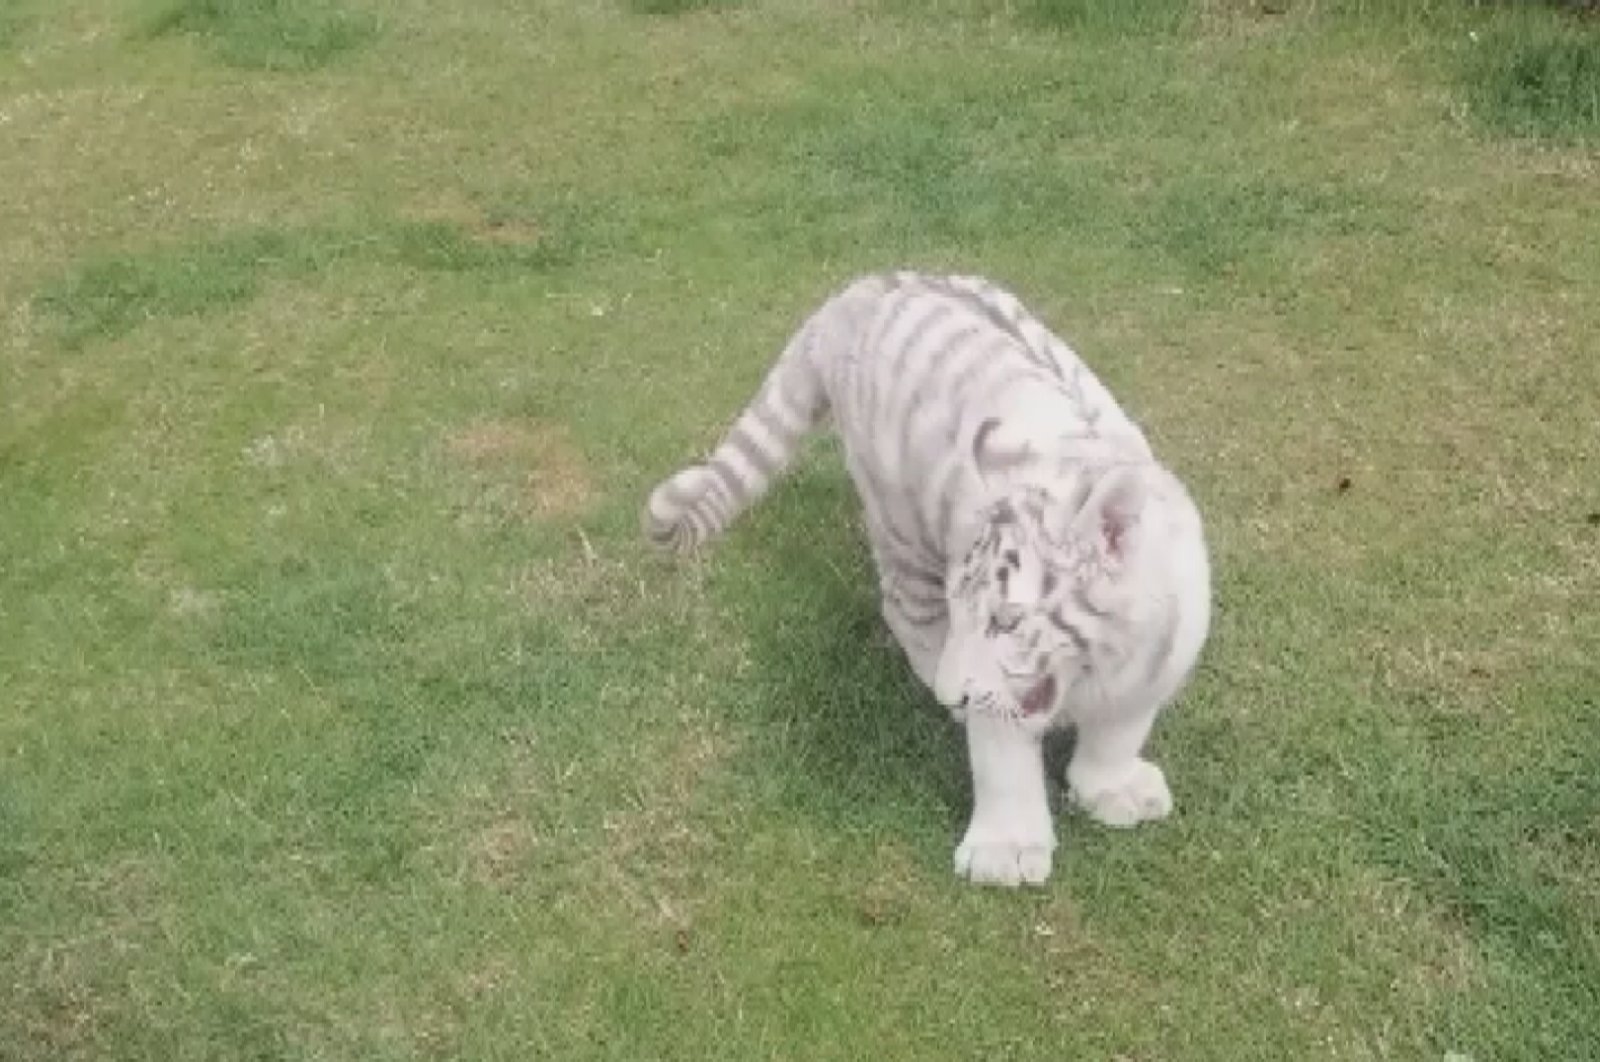 The white tiger cub seized in Istanbul, Turkey, April 13, 2022. (DHA PHOTO)